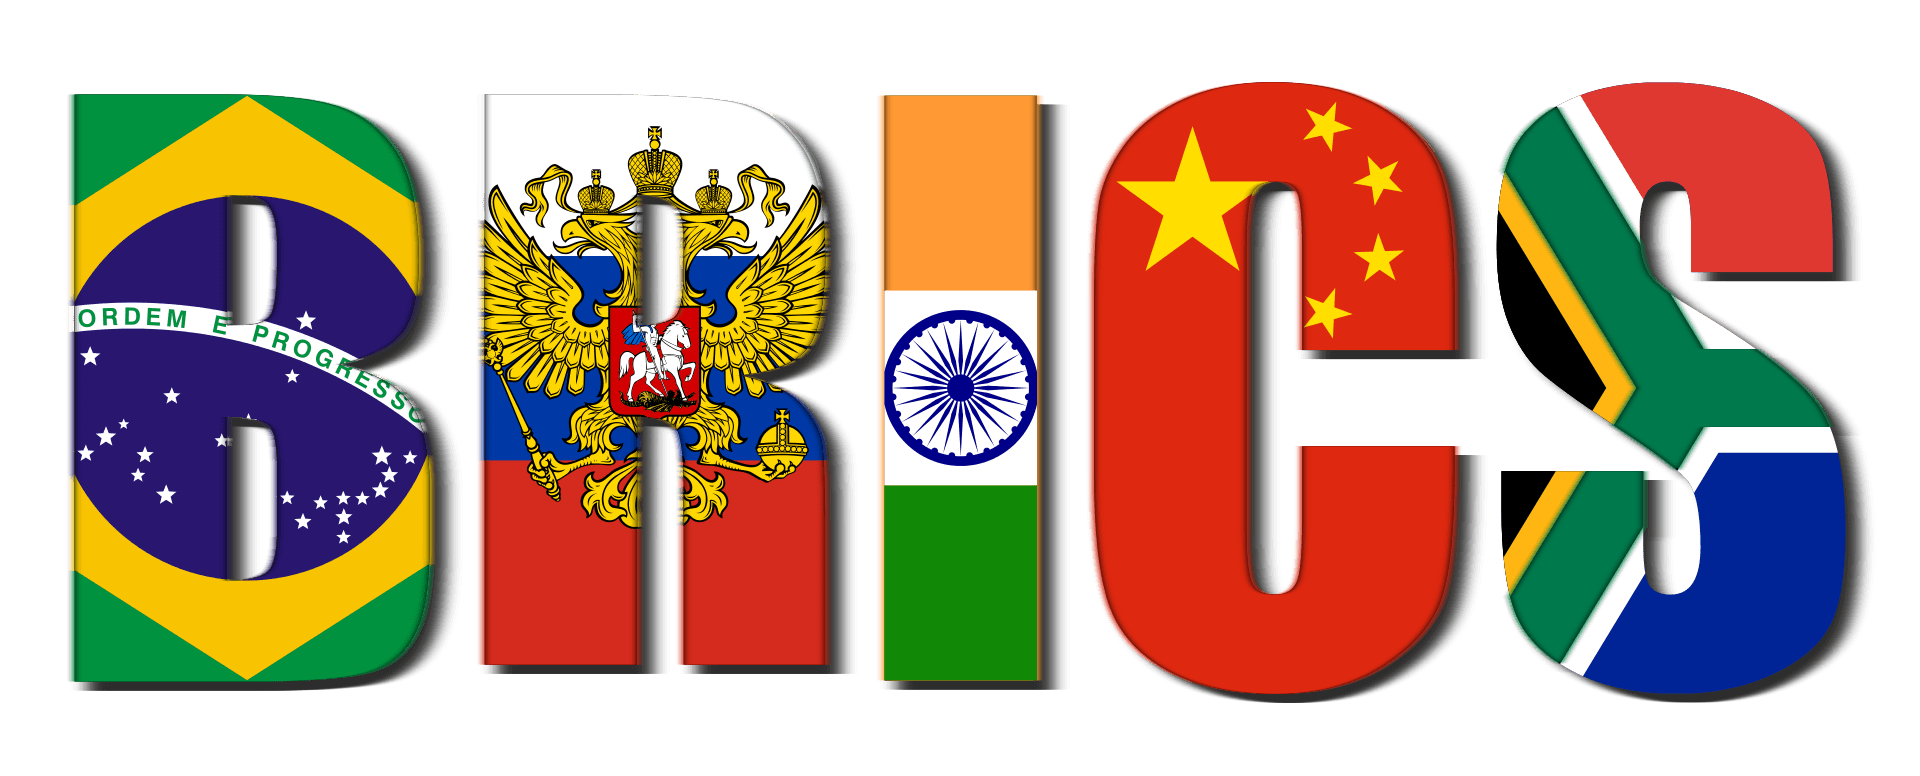 "BRICS" is the acronym denoting the emerging national economies of Brazil, Russia, India, China and South Africa. 